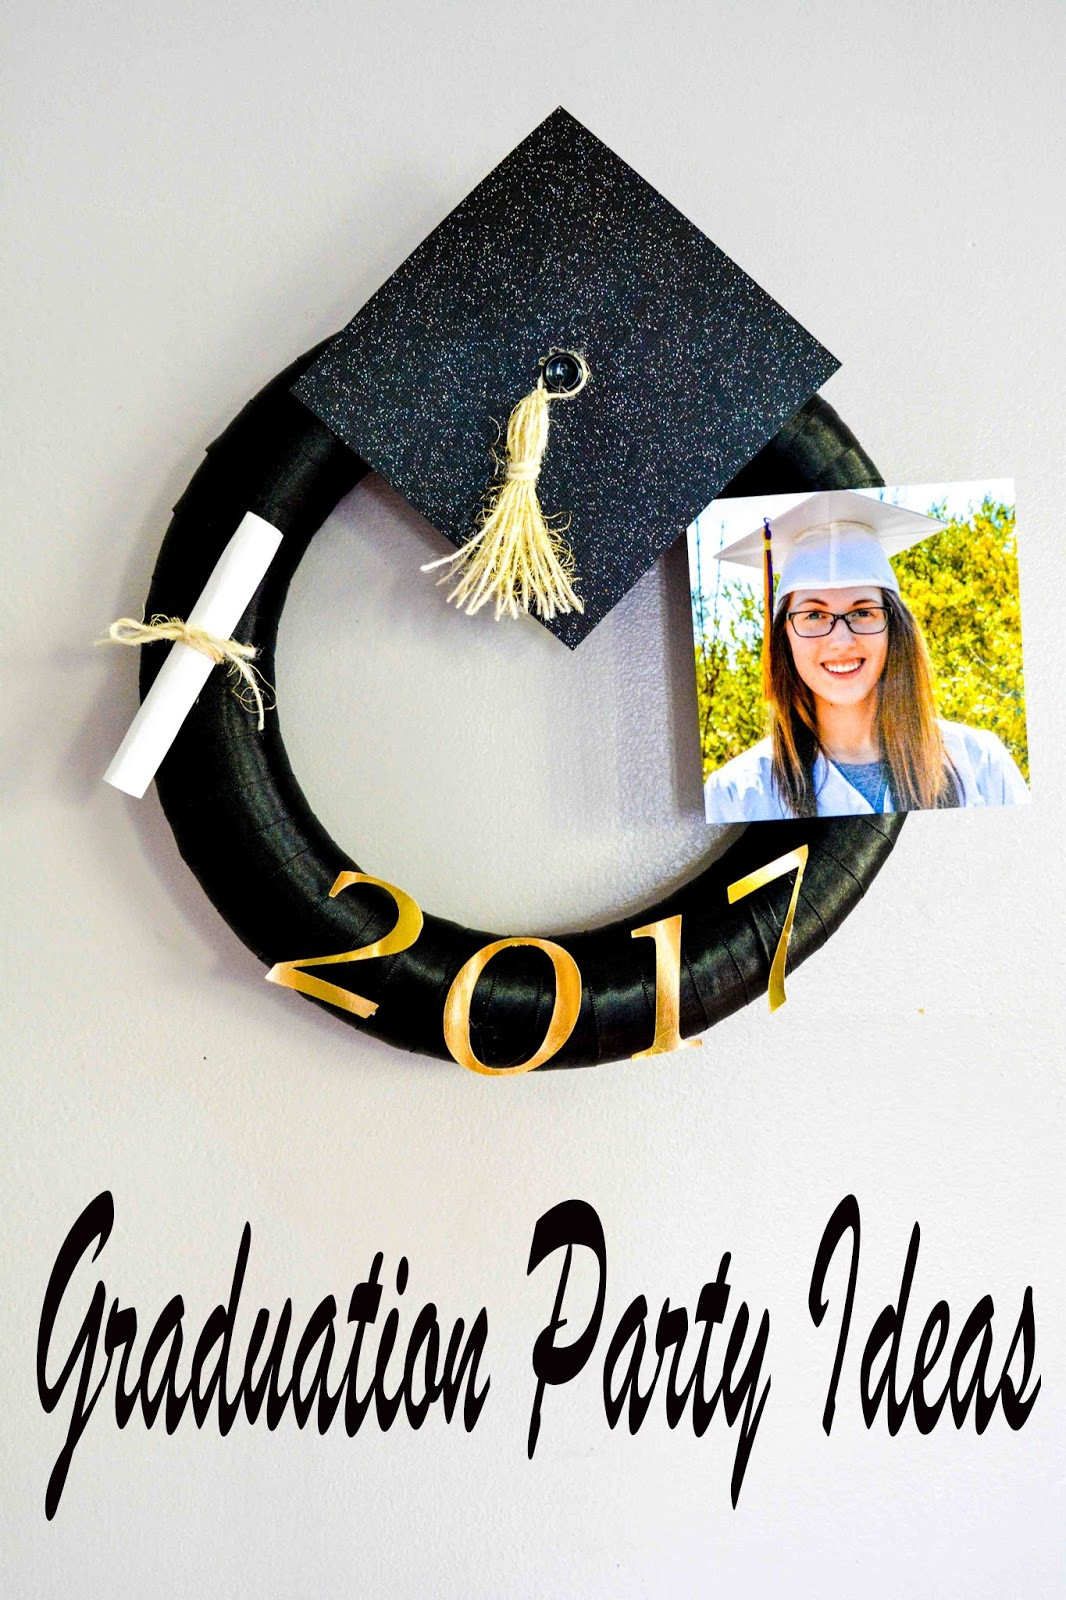 Graduation Party Centerpiece Ideas Cheap
 Theresa s Mixed Nuts Inexpensive Graduation Party Ideas